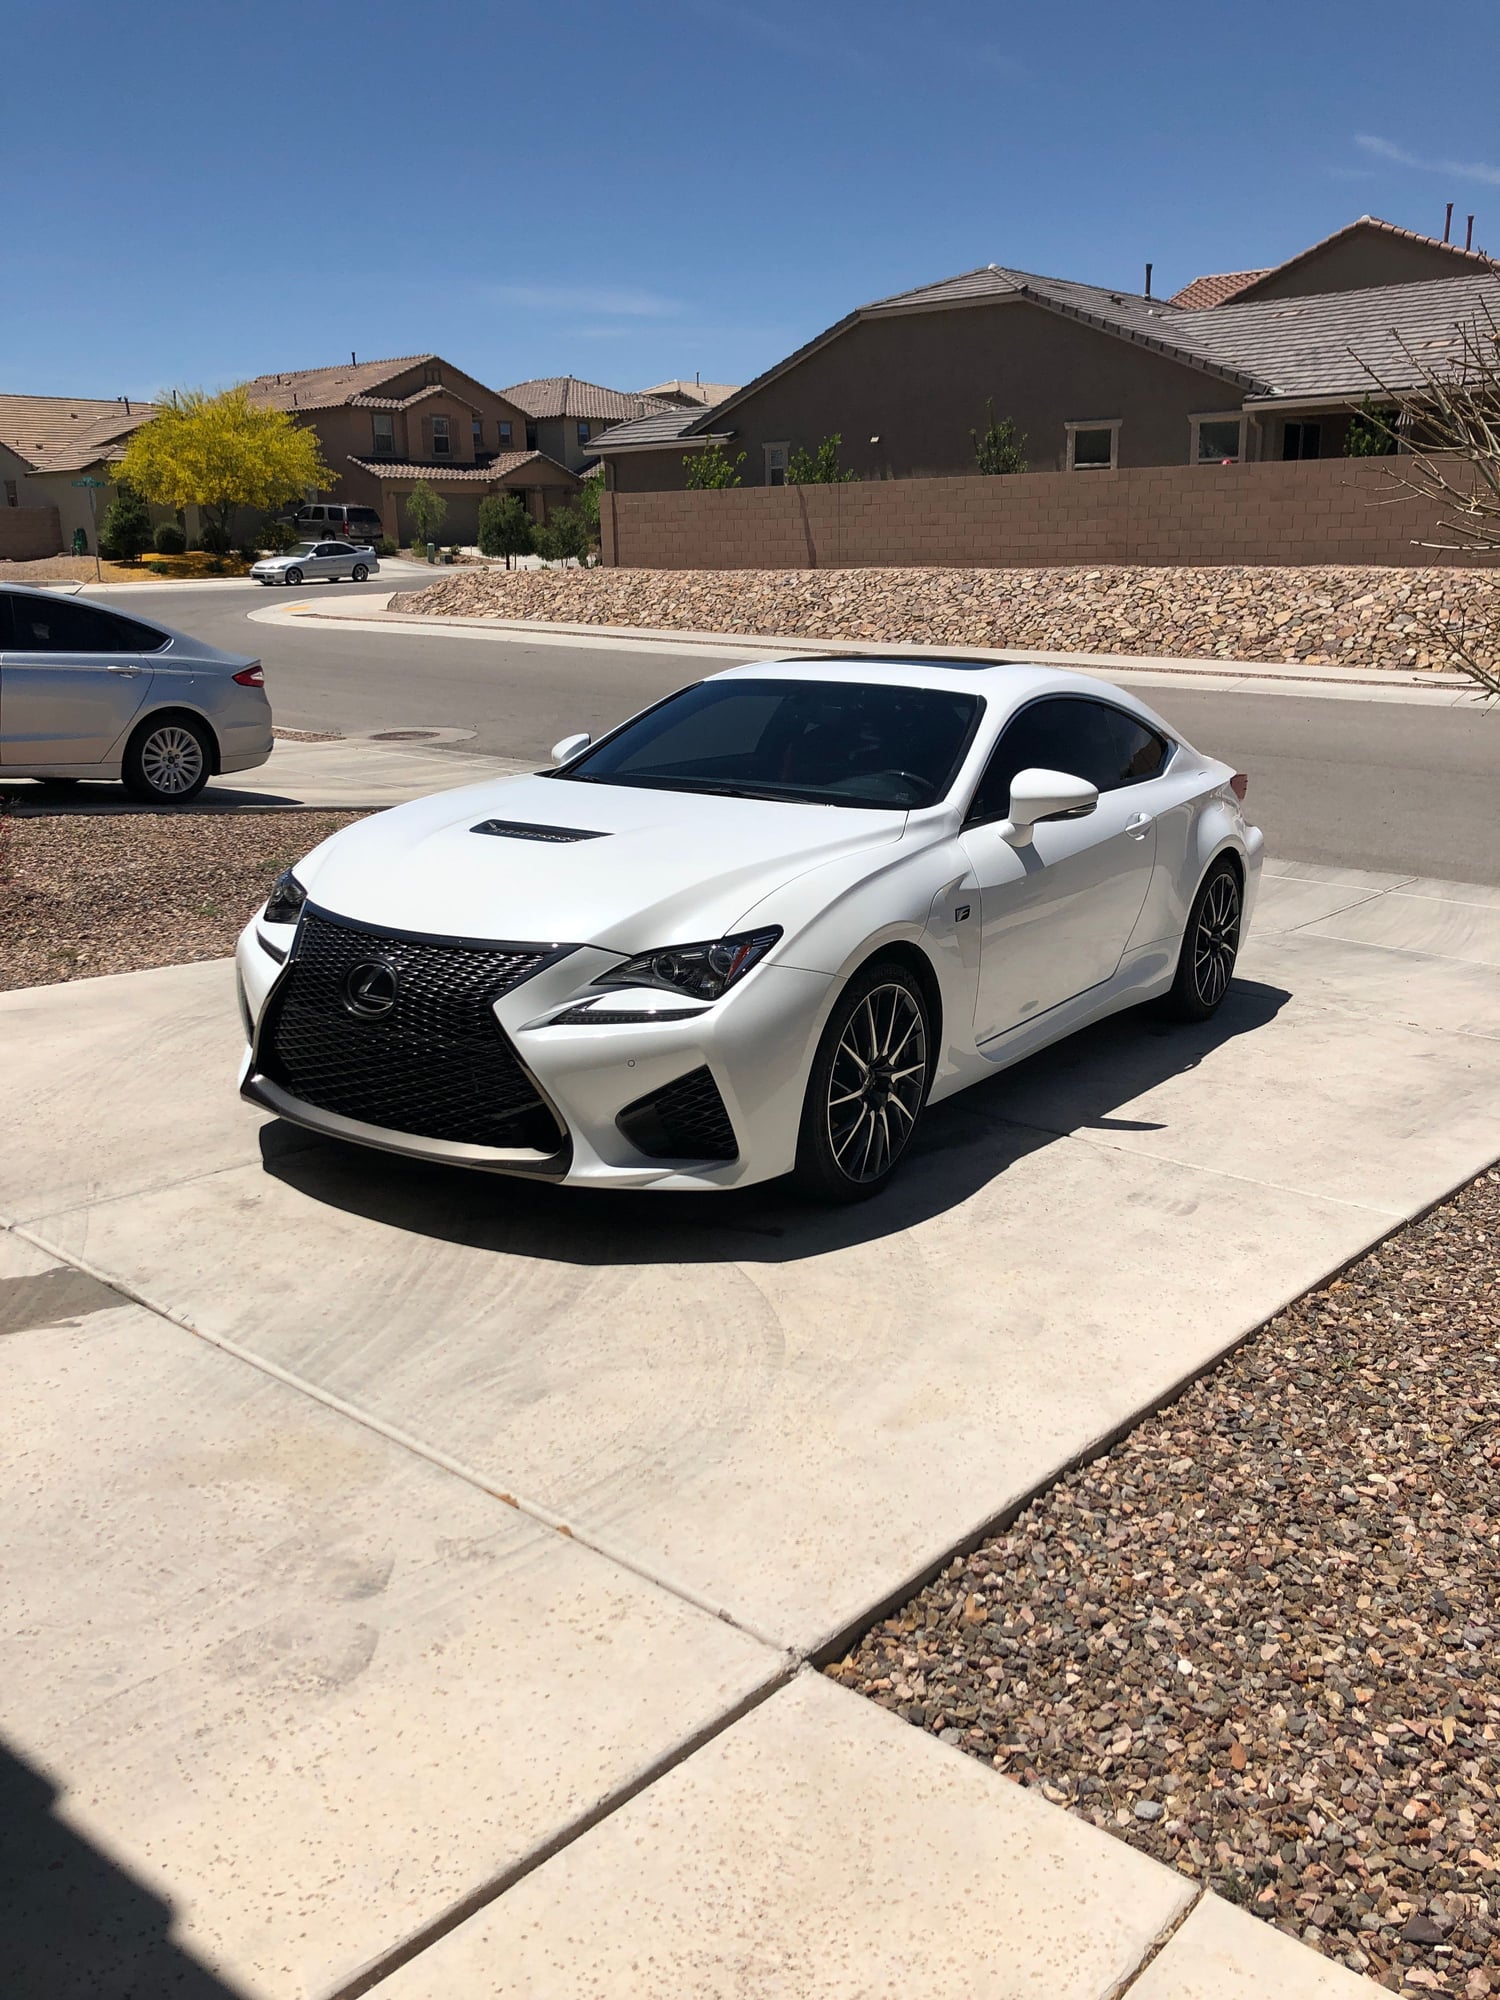 2016 Lexus RC F - 2016 Lexus RC F Ultra White - Used - VIN JTHHP5BC9G5004837 - 19,500 Miles - 8 cyl - 2WD - Automatic - Coupe - White - Tucson, AZ 85747, United States